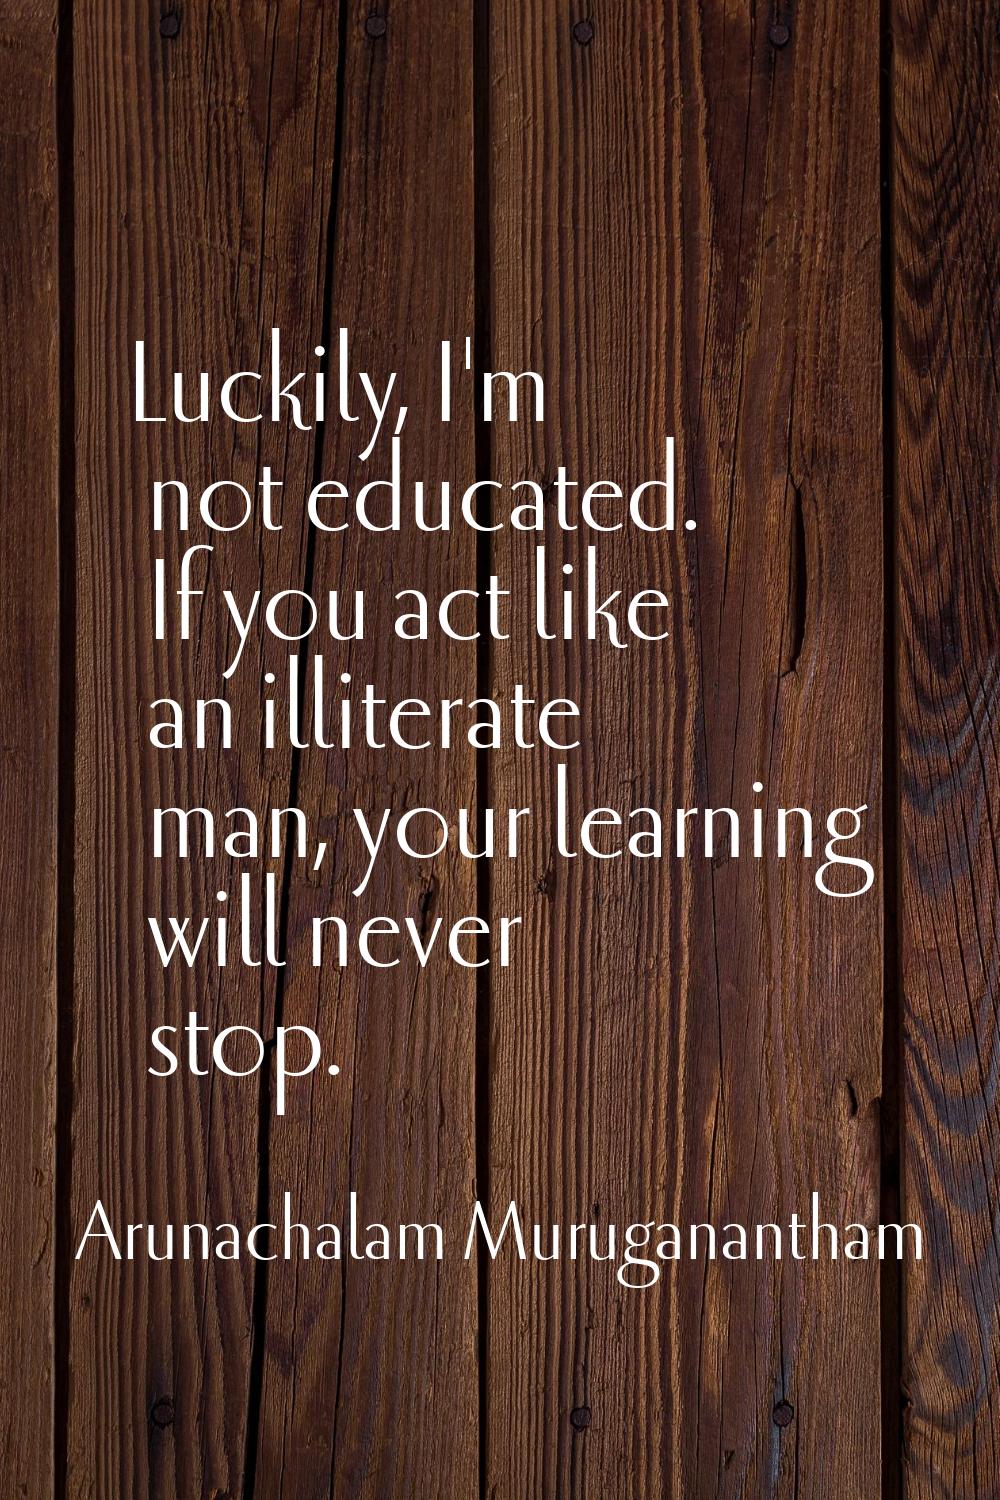 Luckily, I'm not educated. If you act like an illiterate man, your learning will never stop.